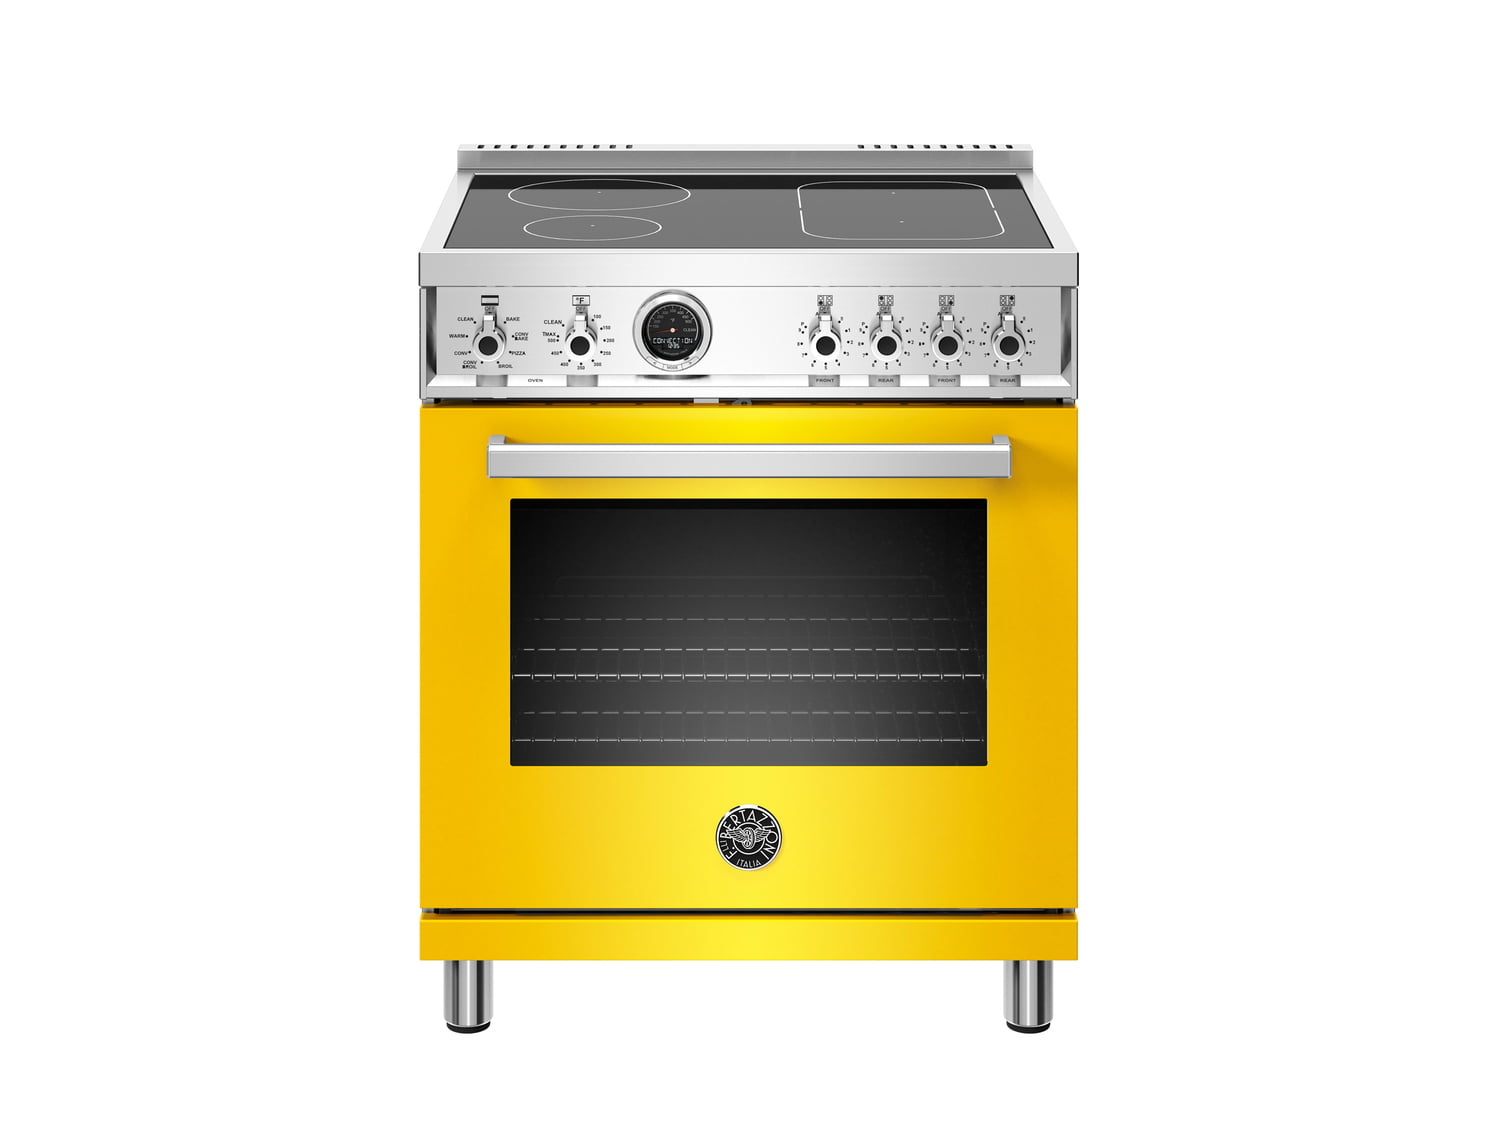 Bertazzoni PROF304INSGIT 30 Inch Induction Range, 4 Heating Zones, Electric Self-Clean Oven Giallo